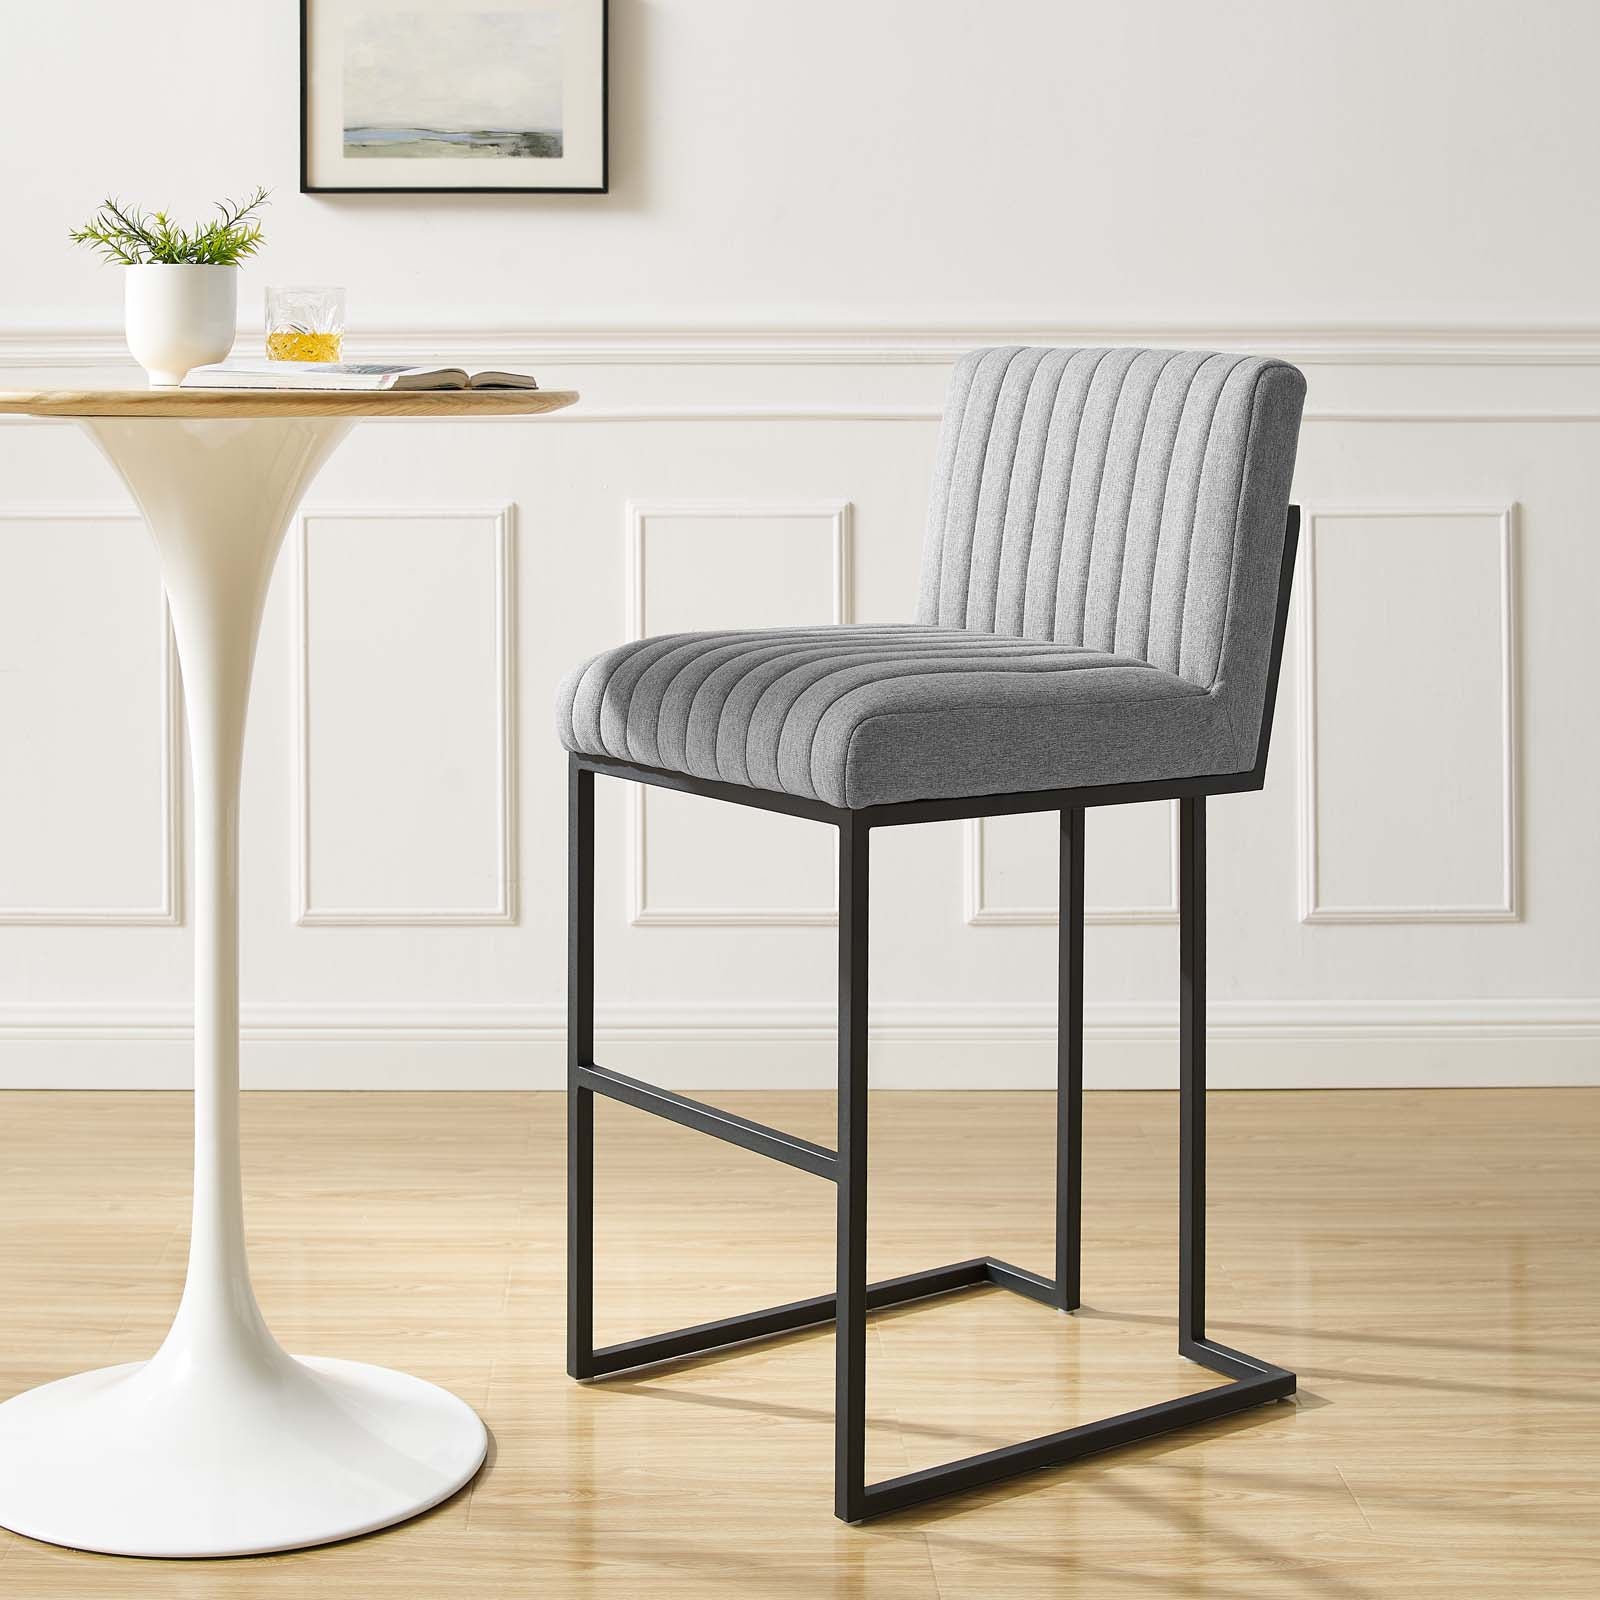 Modway Barstools - Indulge-Channel-Tufted-Fabric-Bar-Stool-Light-Gray